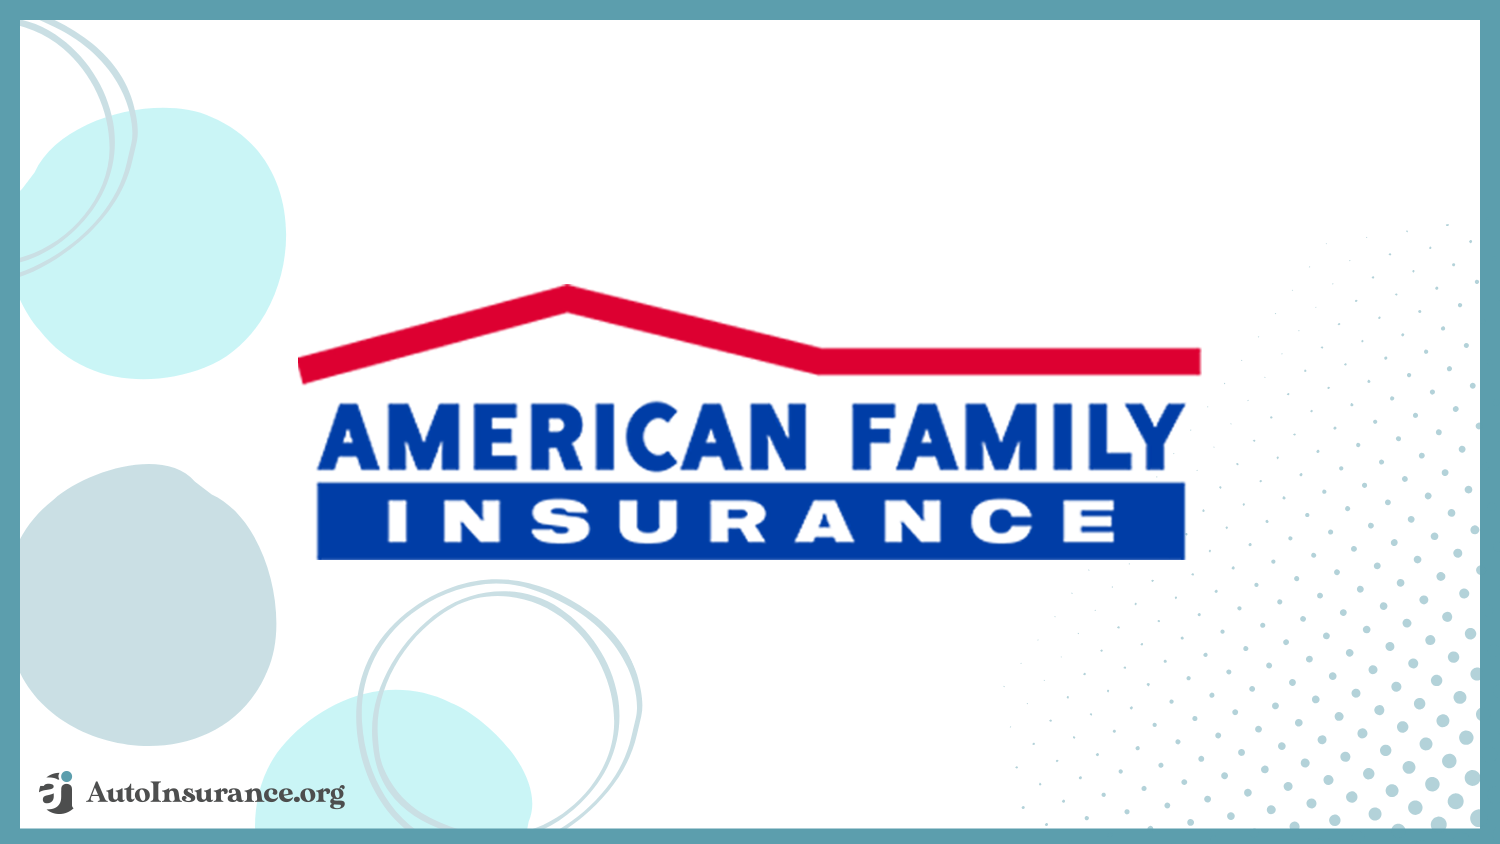 American Family: Best Auto Insurance for Wheelchair-Accessible Vehicles